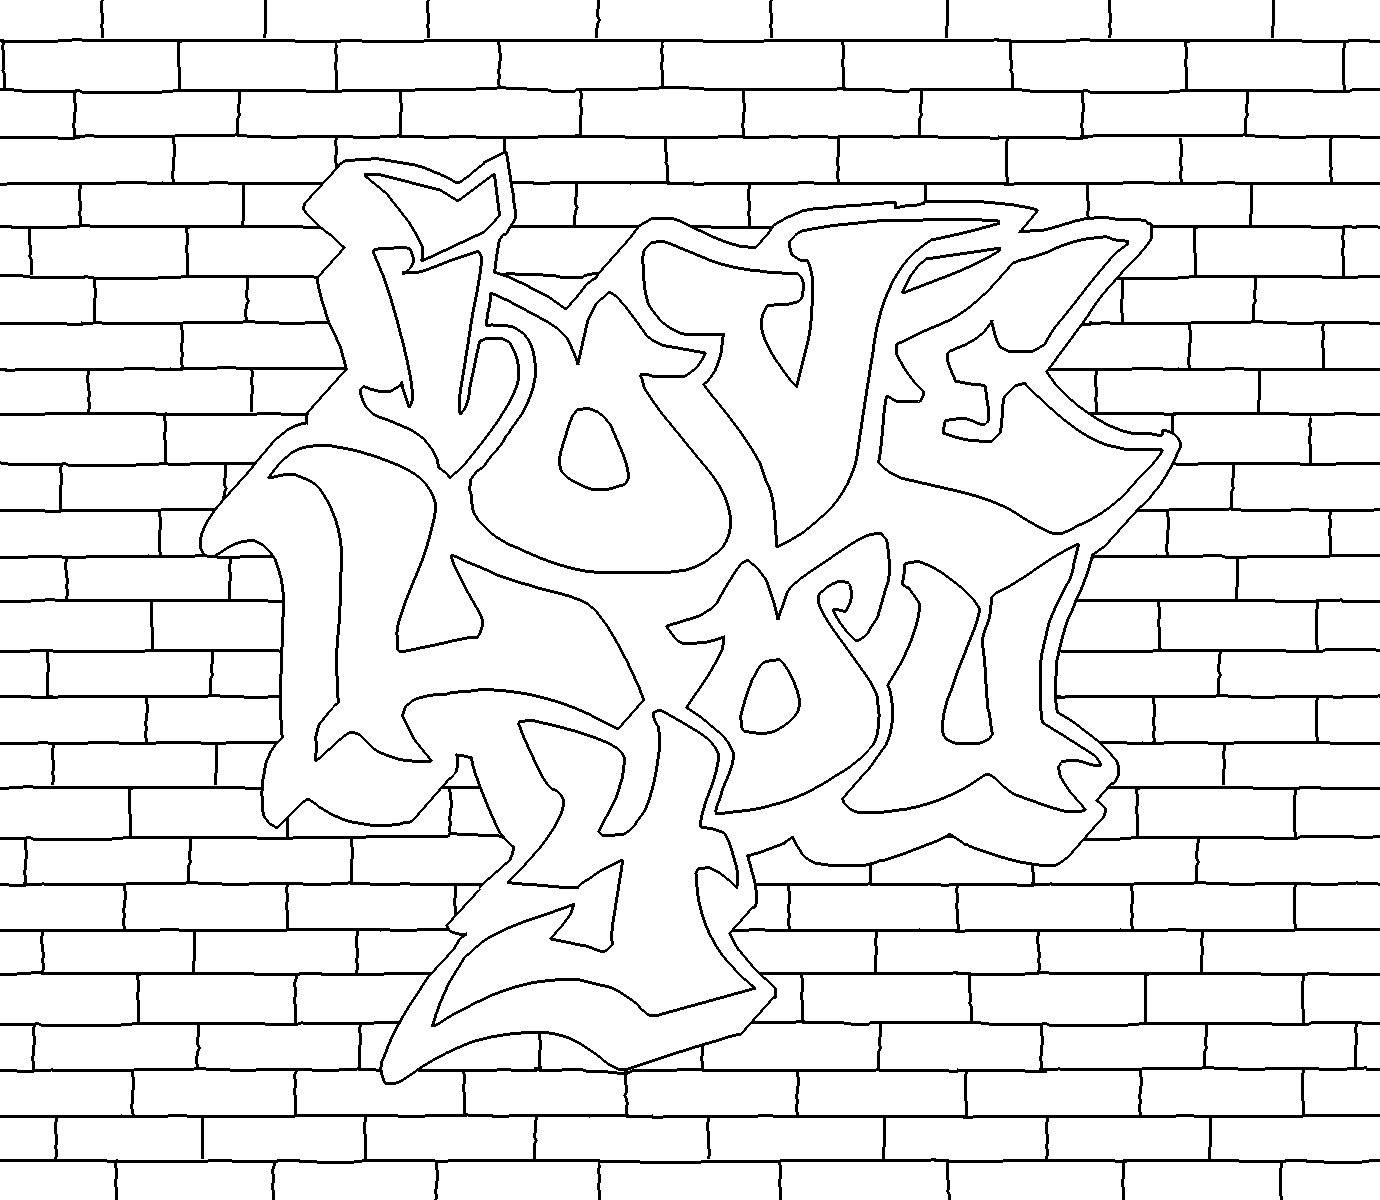 Download Graffiti Coloring Pages for Teens and Adults - Best ...